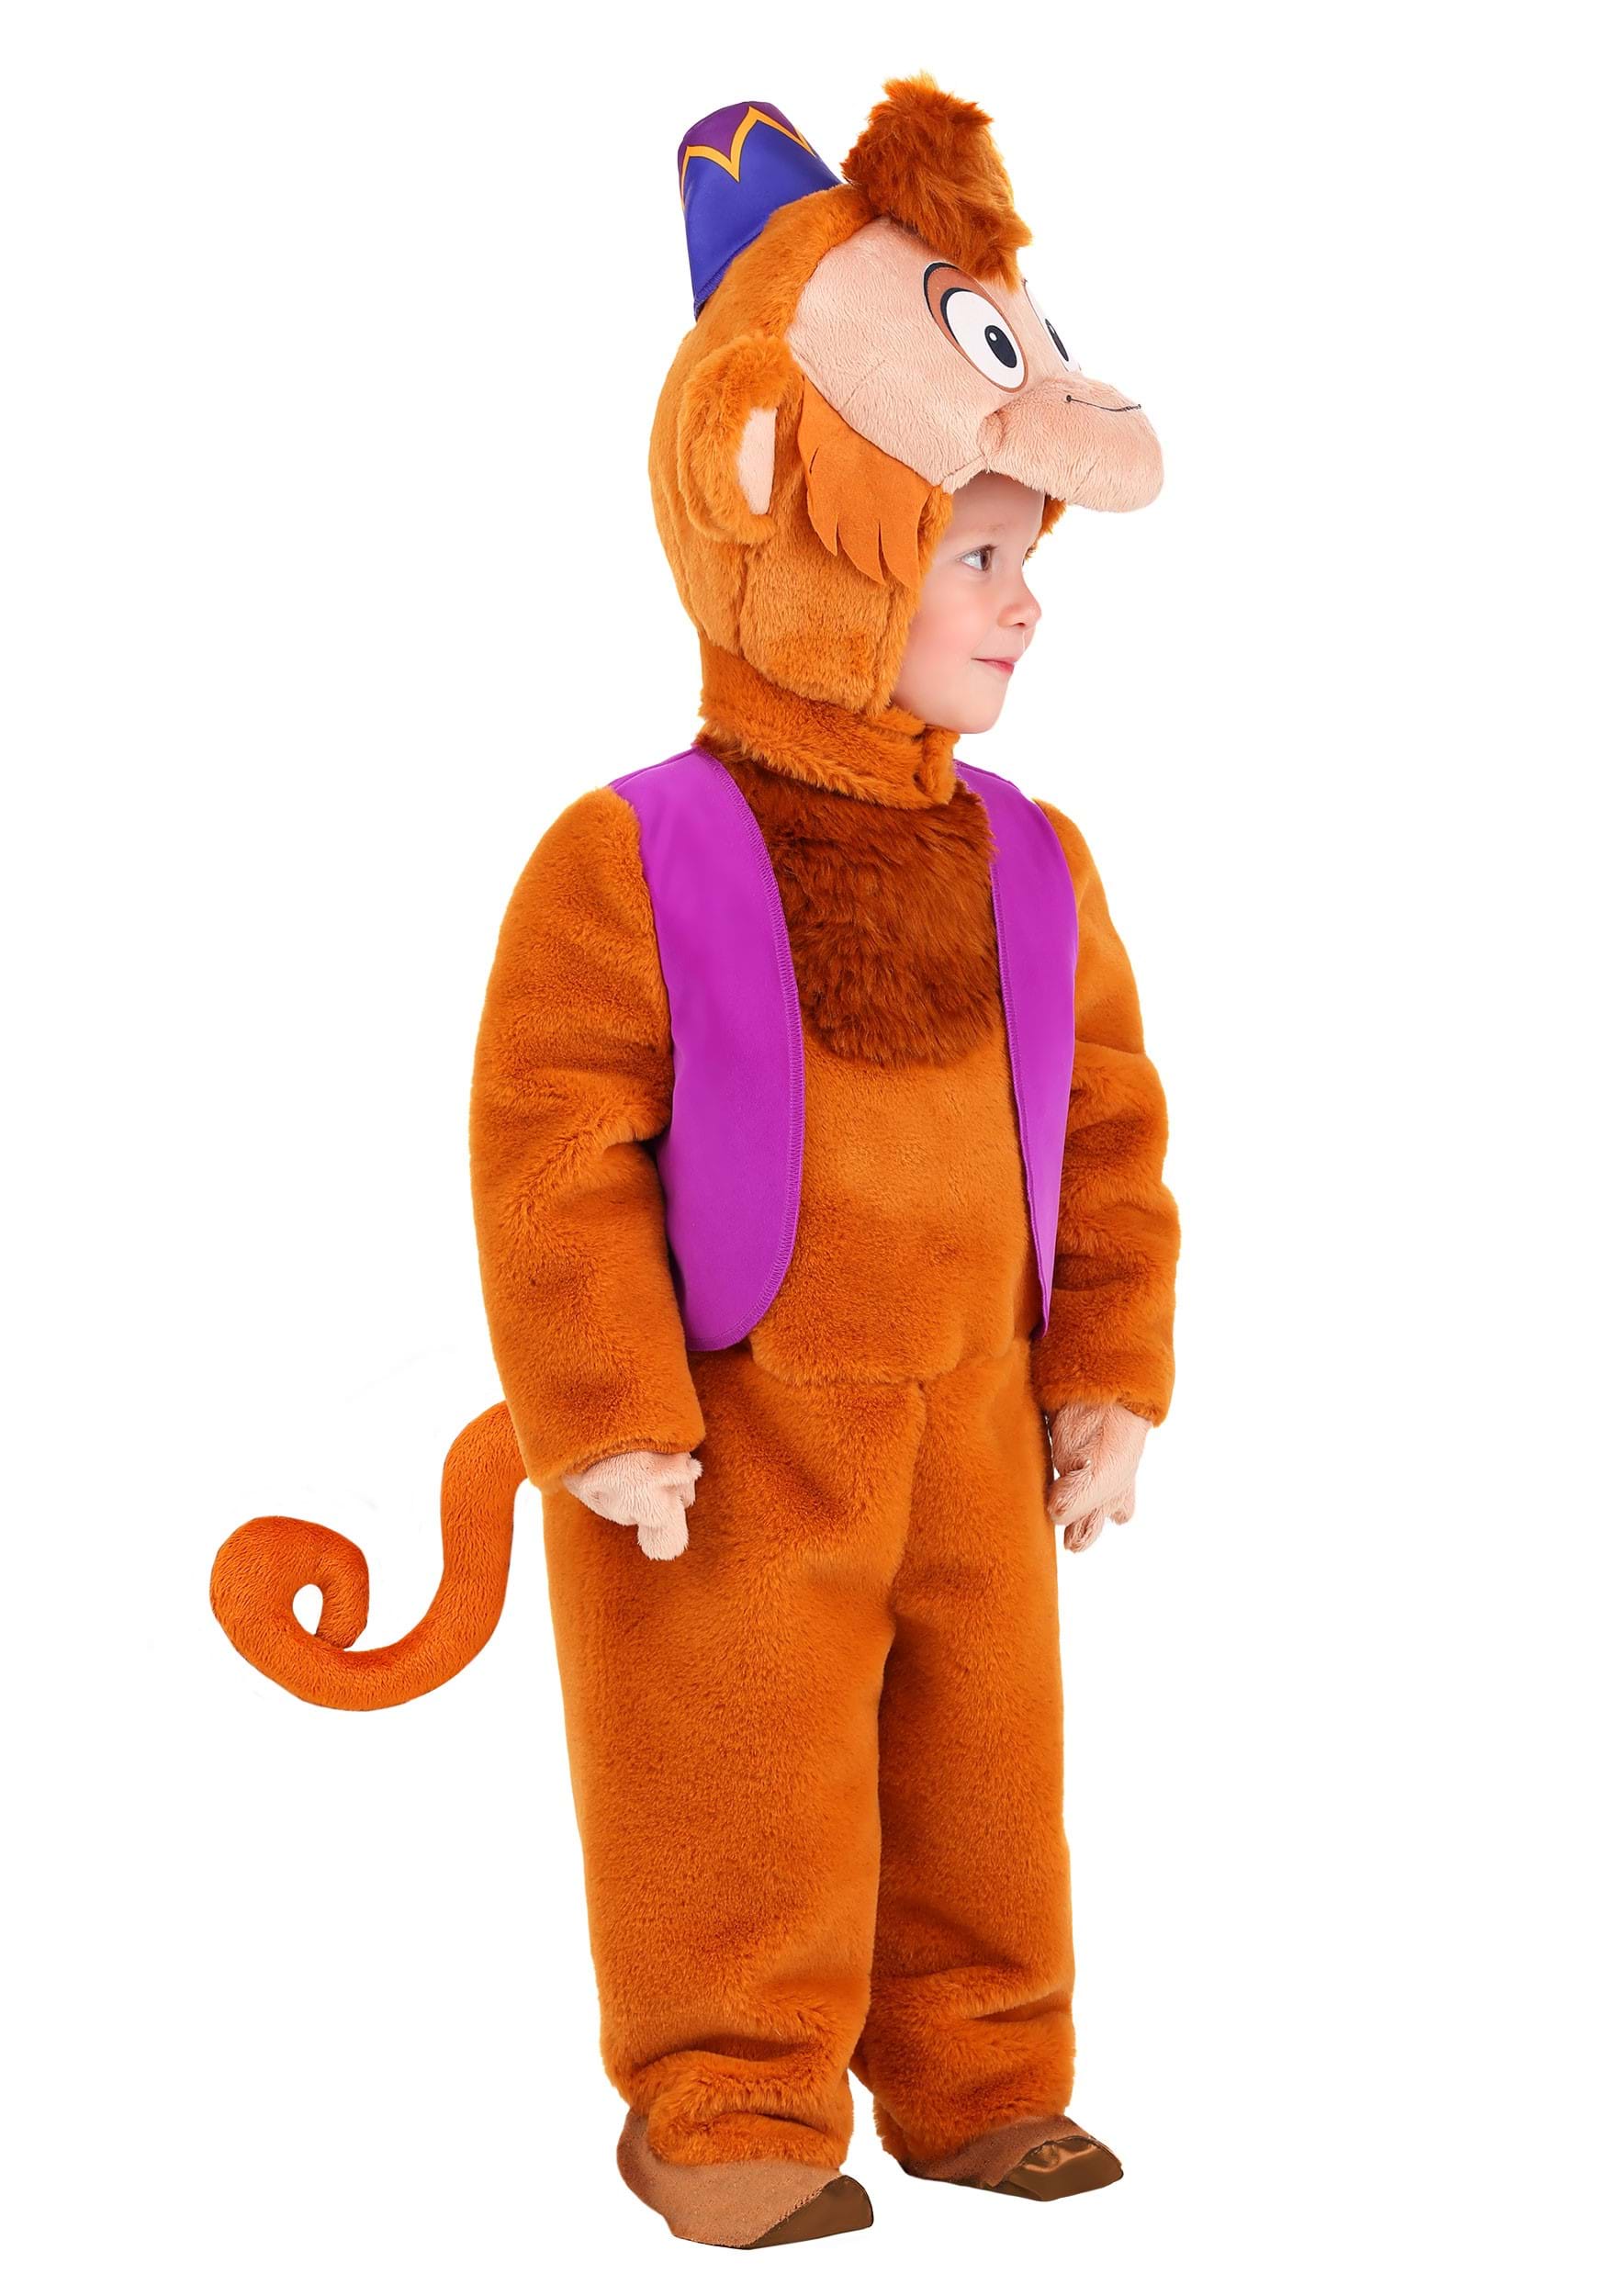 https://images.halloweencostumes.ca/products/62872/2-1-297758/aladdin-toddler-abu-deluxe-costume-alt-6.jpg